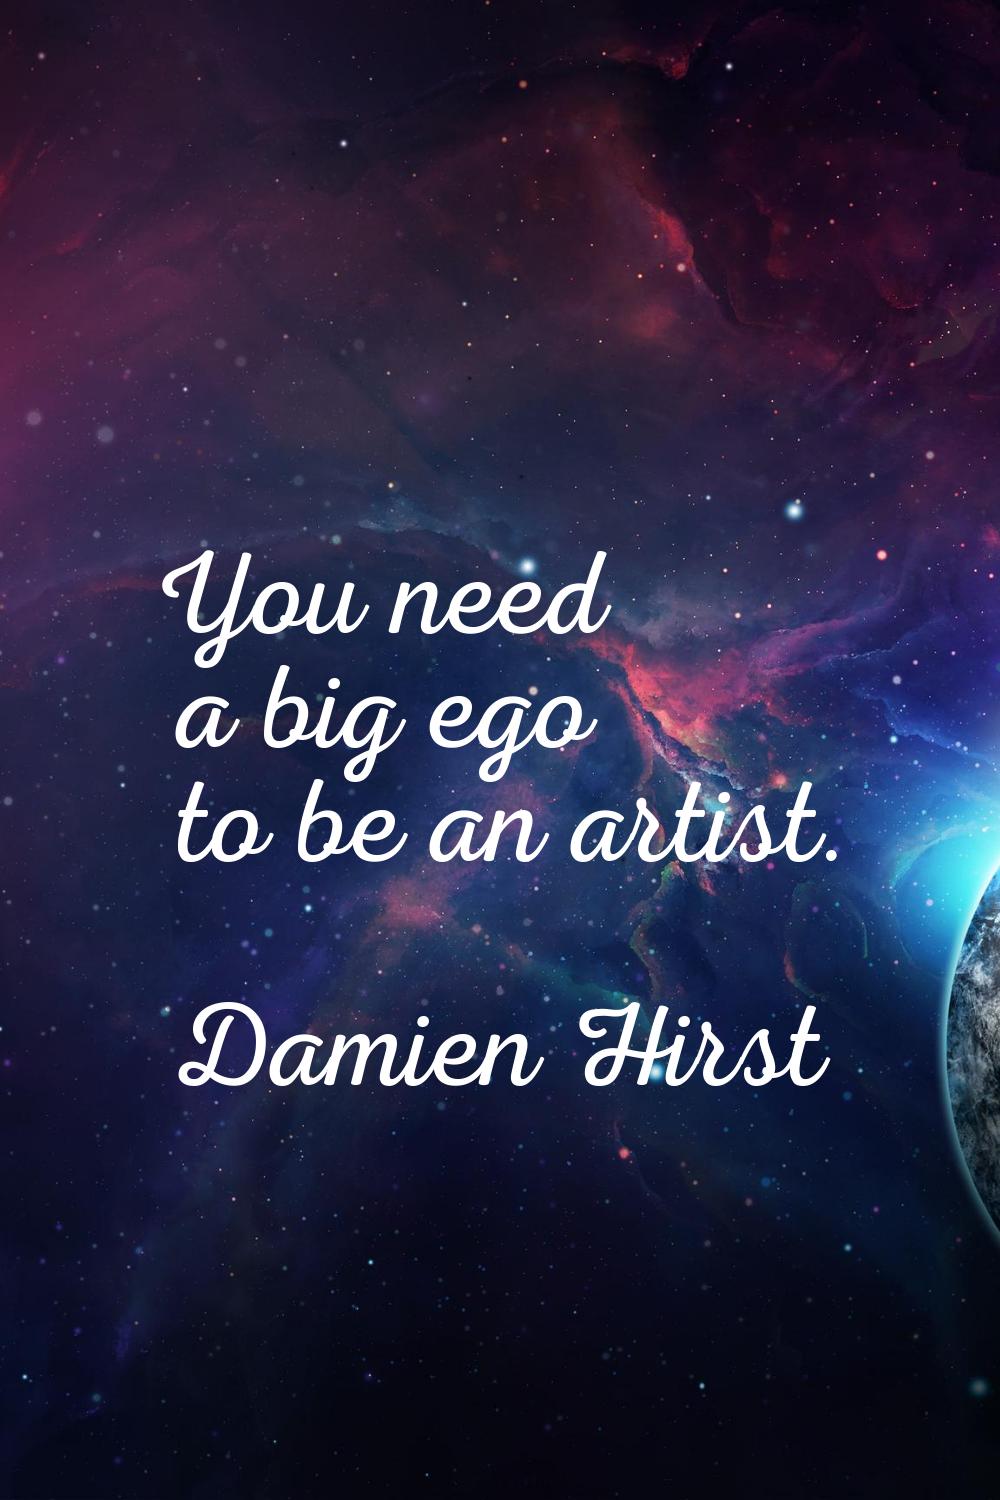 You need a big ego to be an artist.